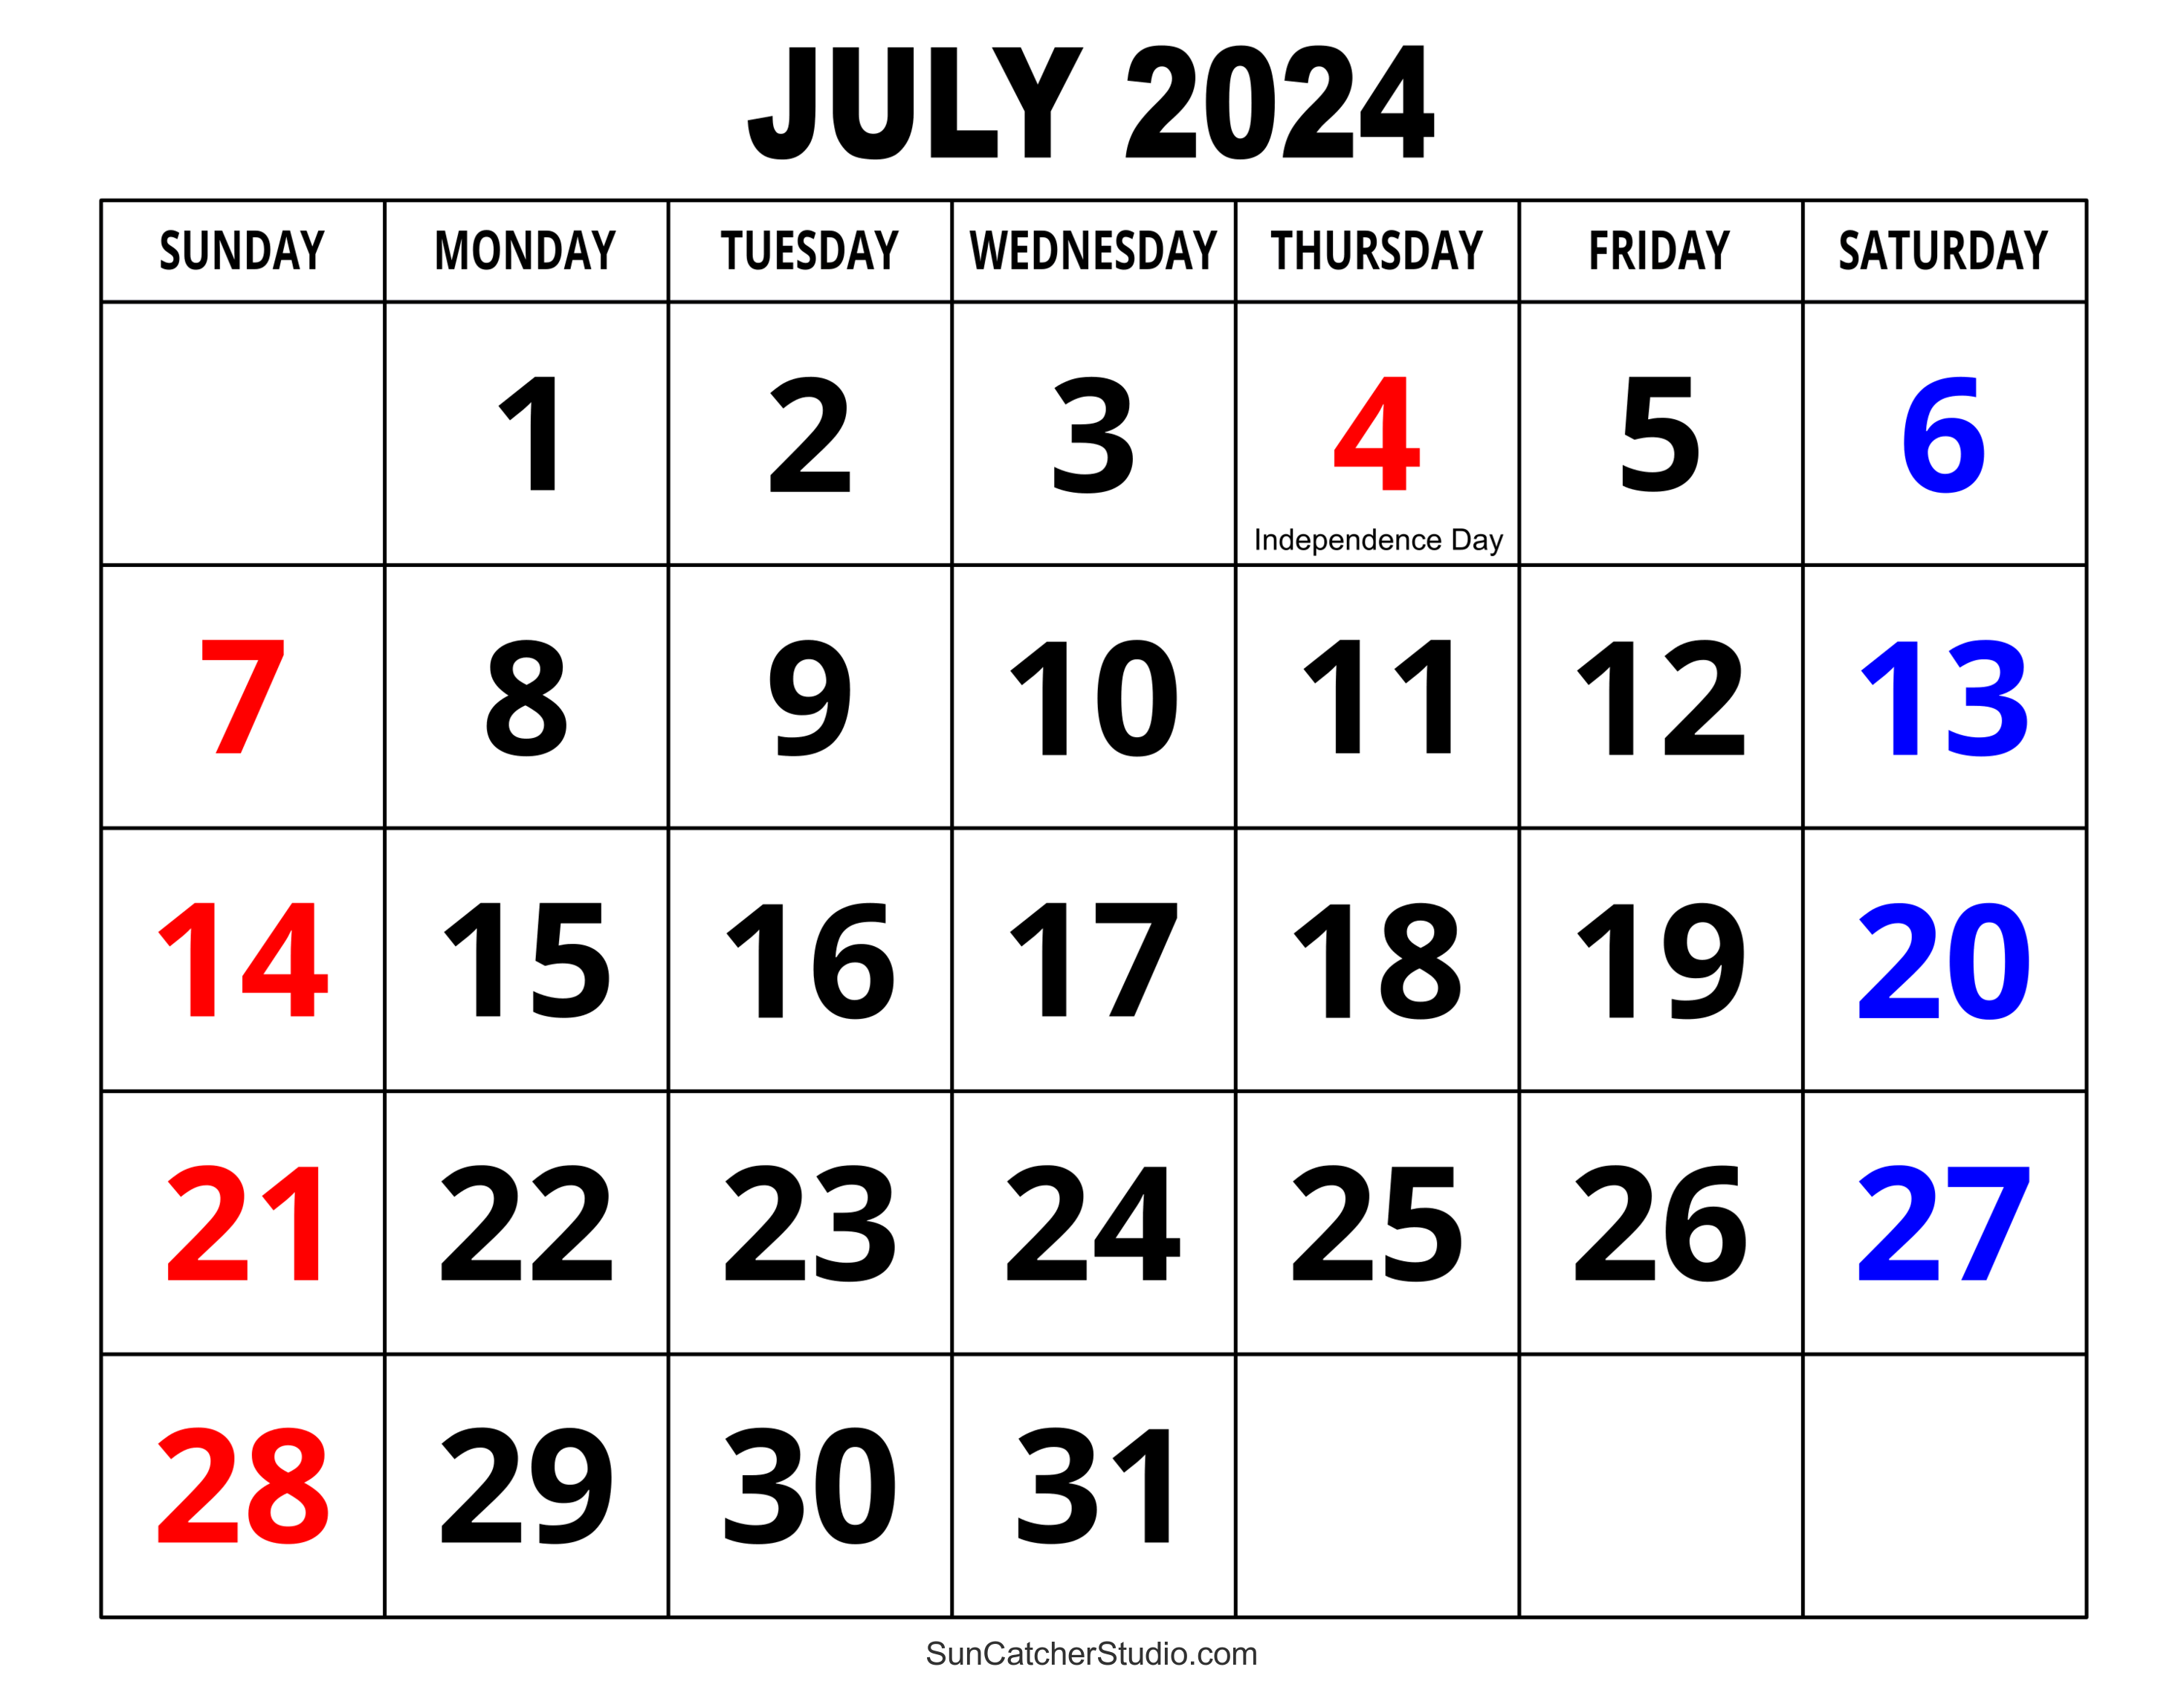 July 2024 Calendar (Free Printable) – Diy Projects, Patterns inside July 19th Holiday Calendar 2024